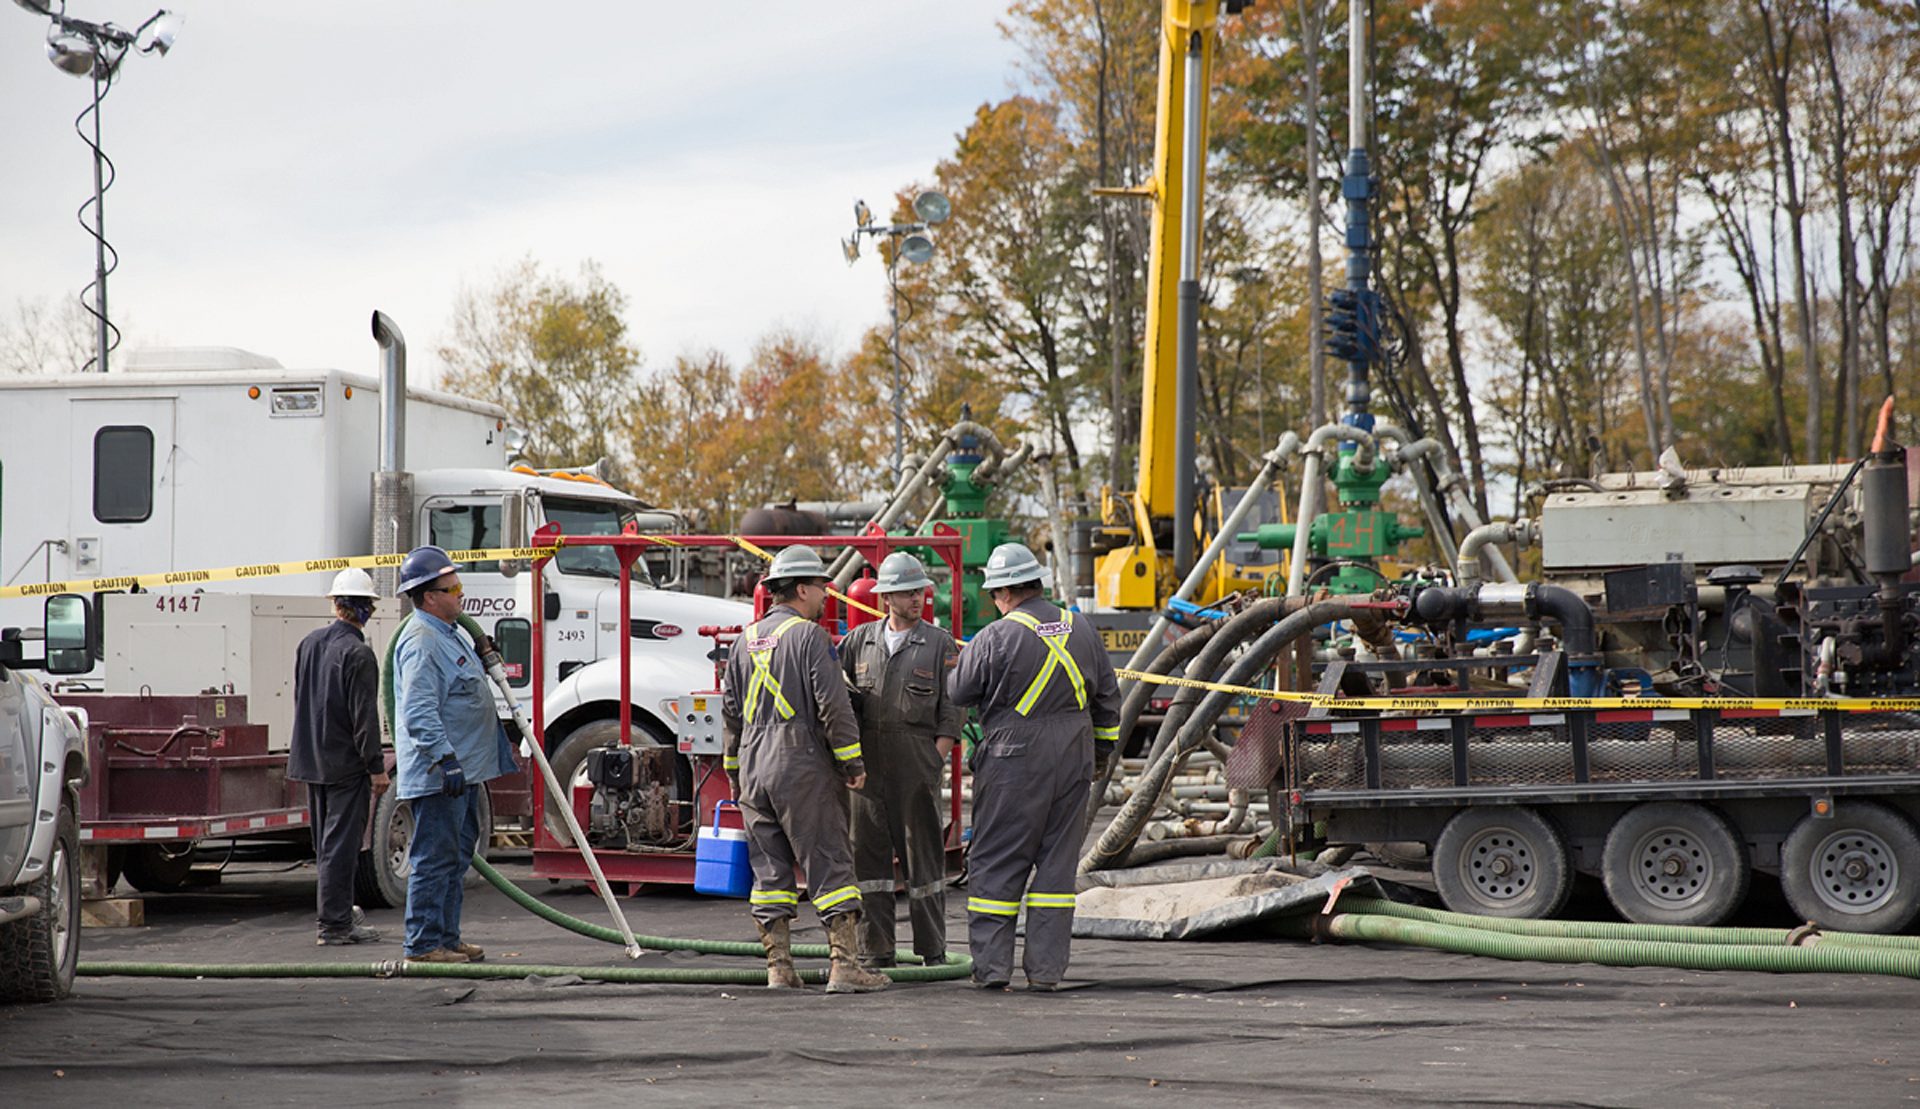 Workers vacuum fluids surrounding a frack site in Harford Township, Susquehanna County, Pa.